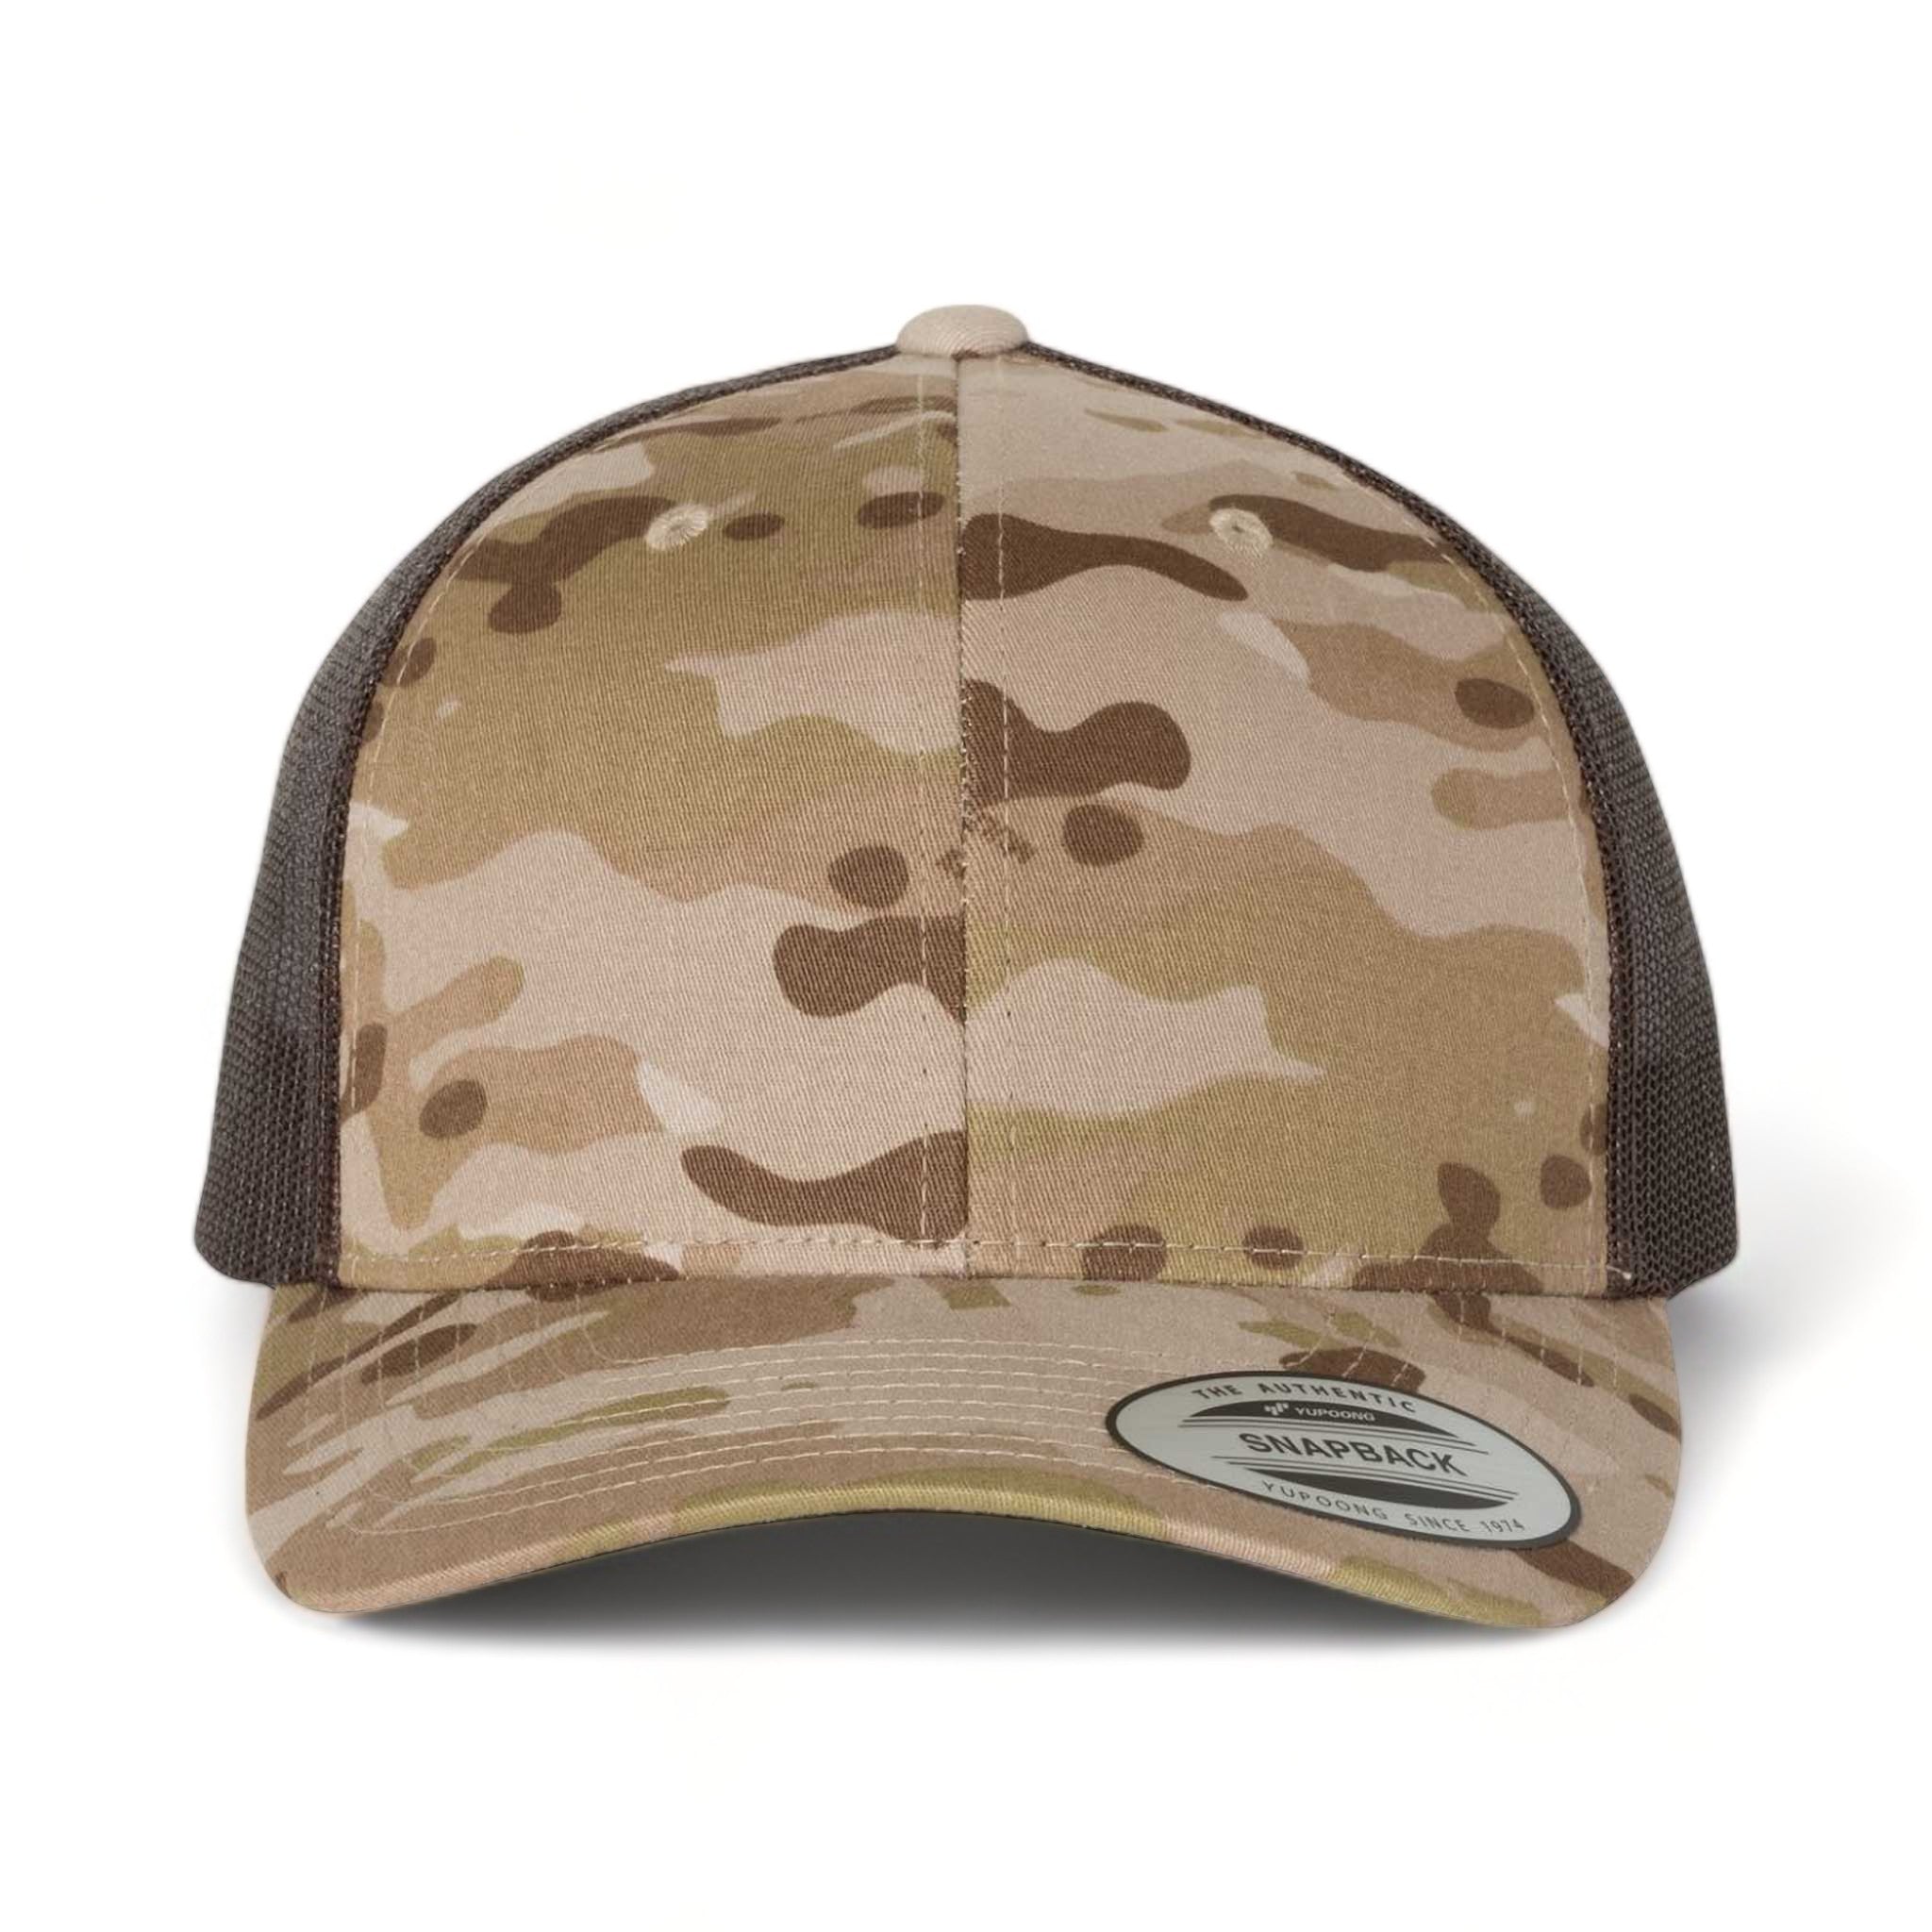 Front view of YP Classics 6606 custom hat in multicam arid and brown